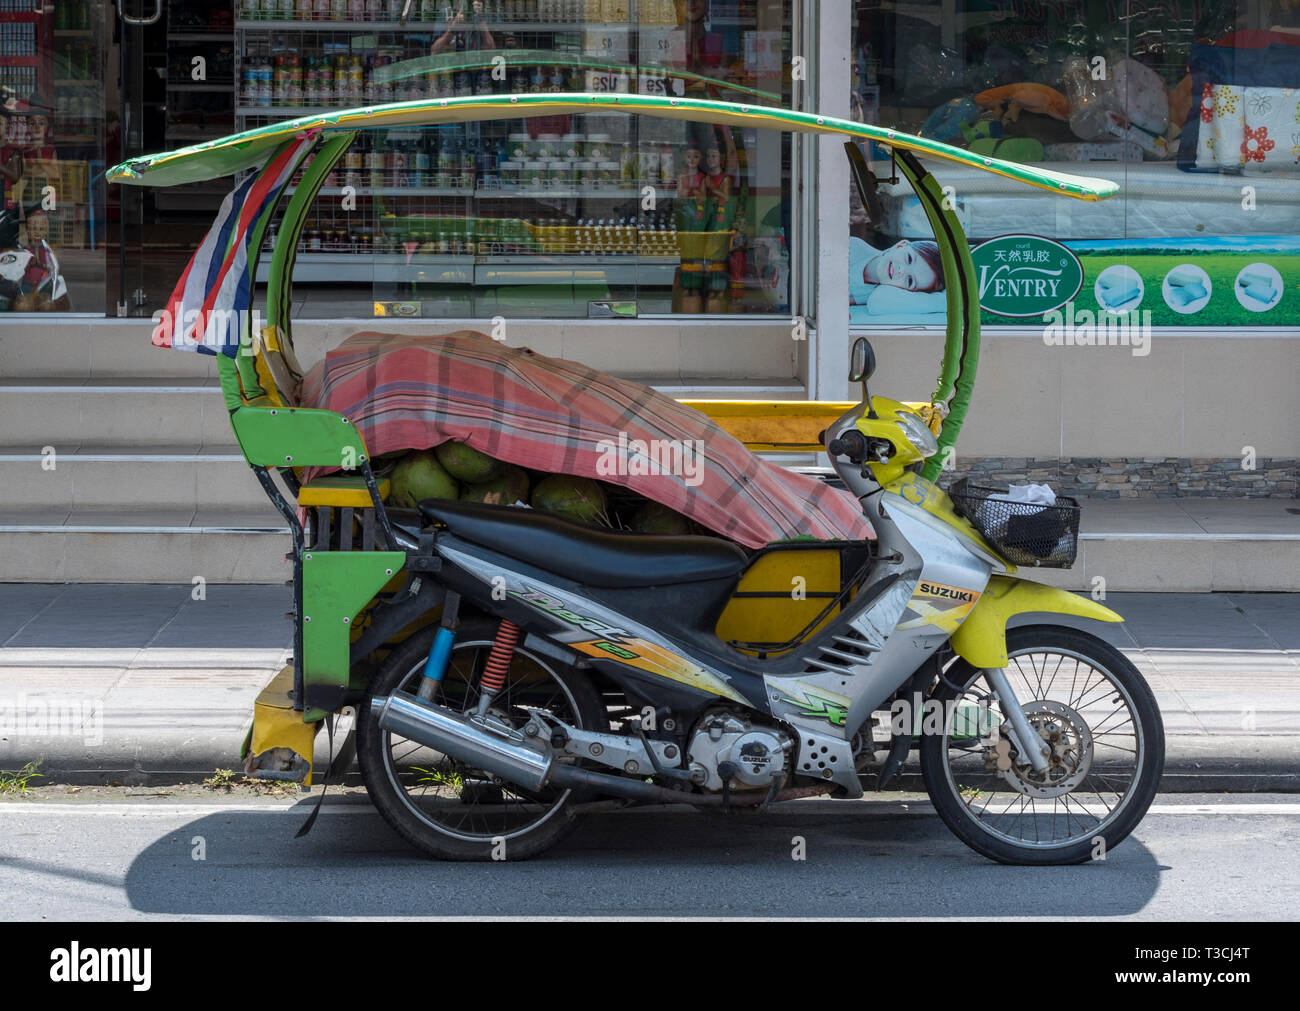 a motorcycle, motorbike and scooter moped with a sidecar being used as a taxi for carrying goods and people as a form of public transport in Bangkok. Stock Photo